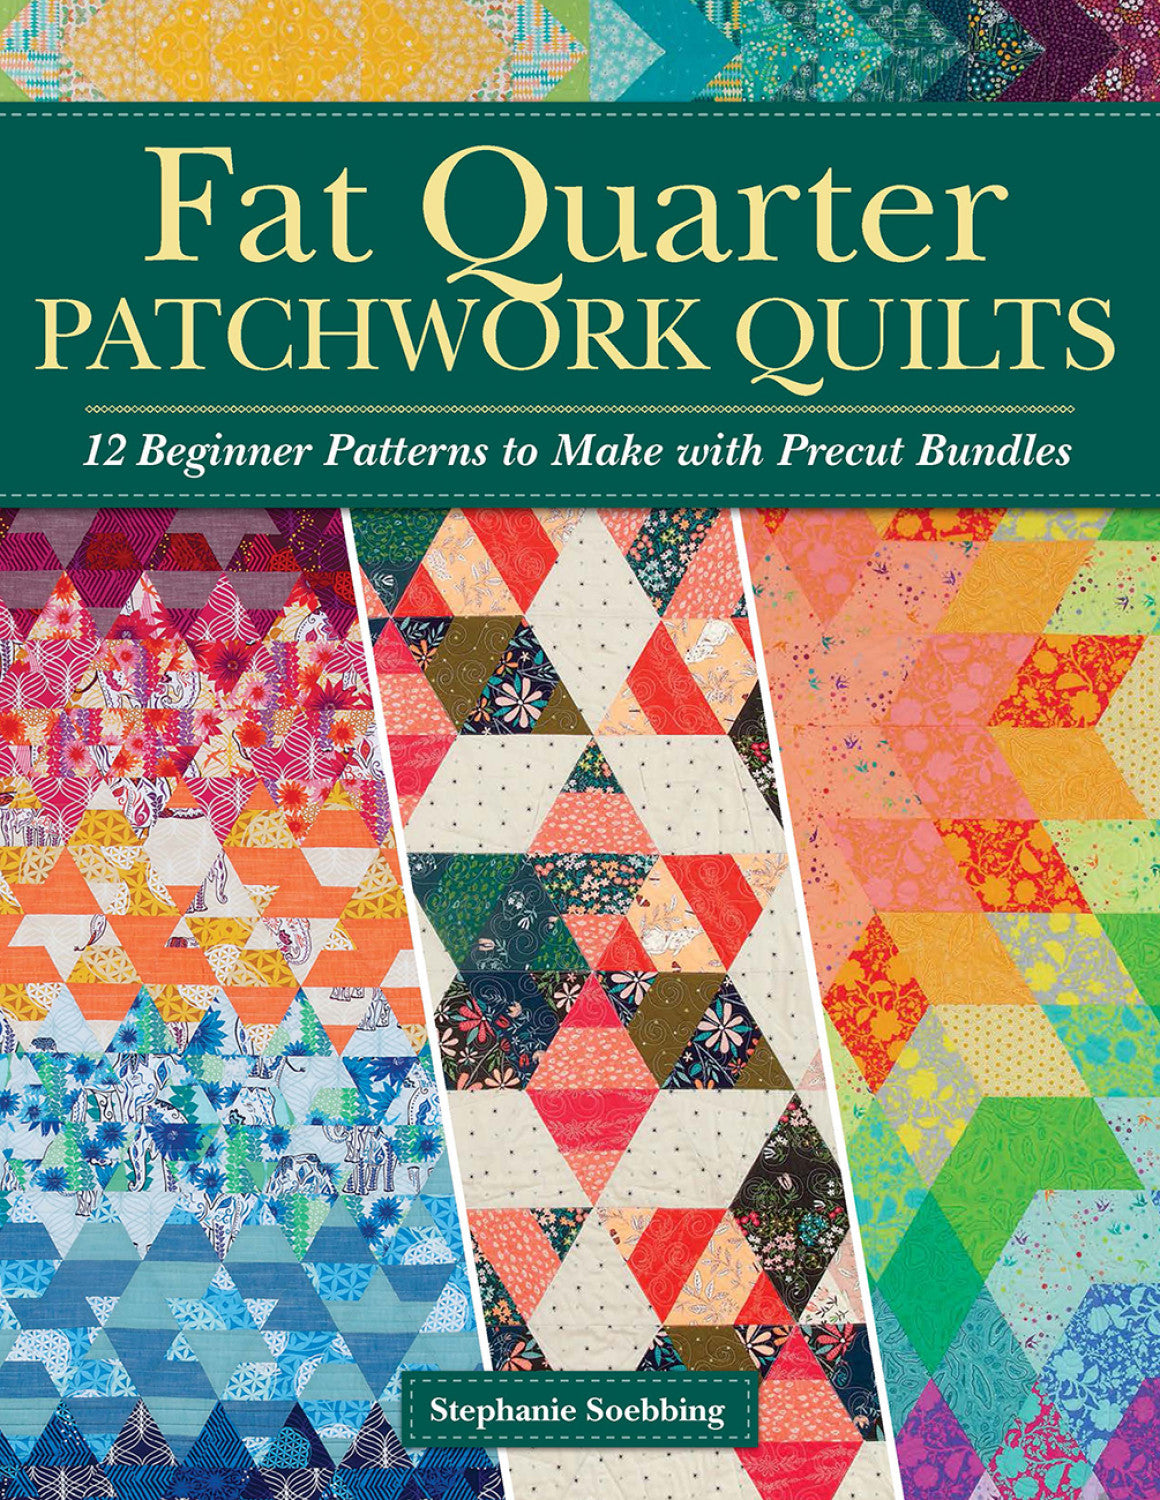 Fat Quarter Patchwork Quilts by Stephanie Soebbing